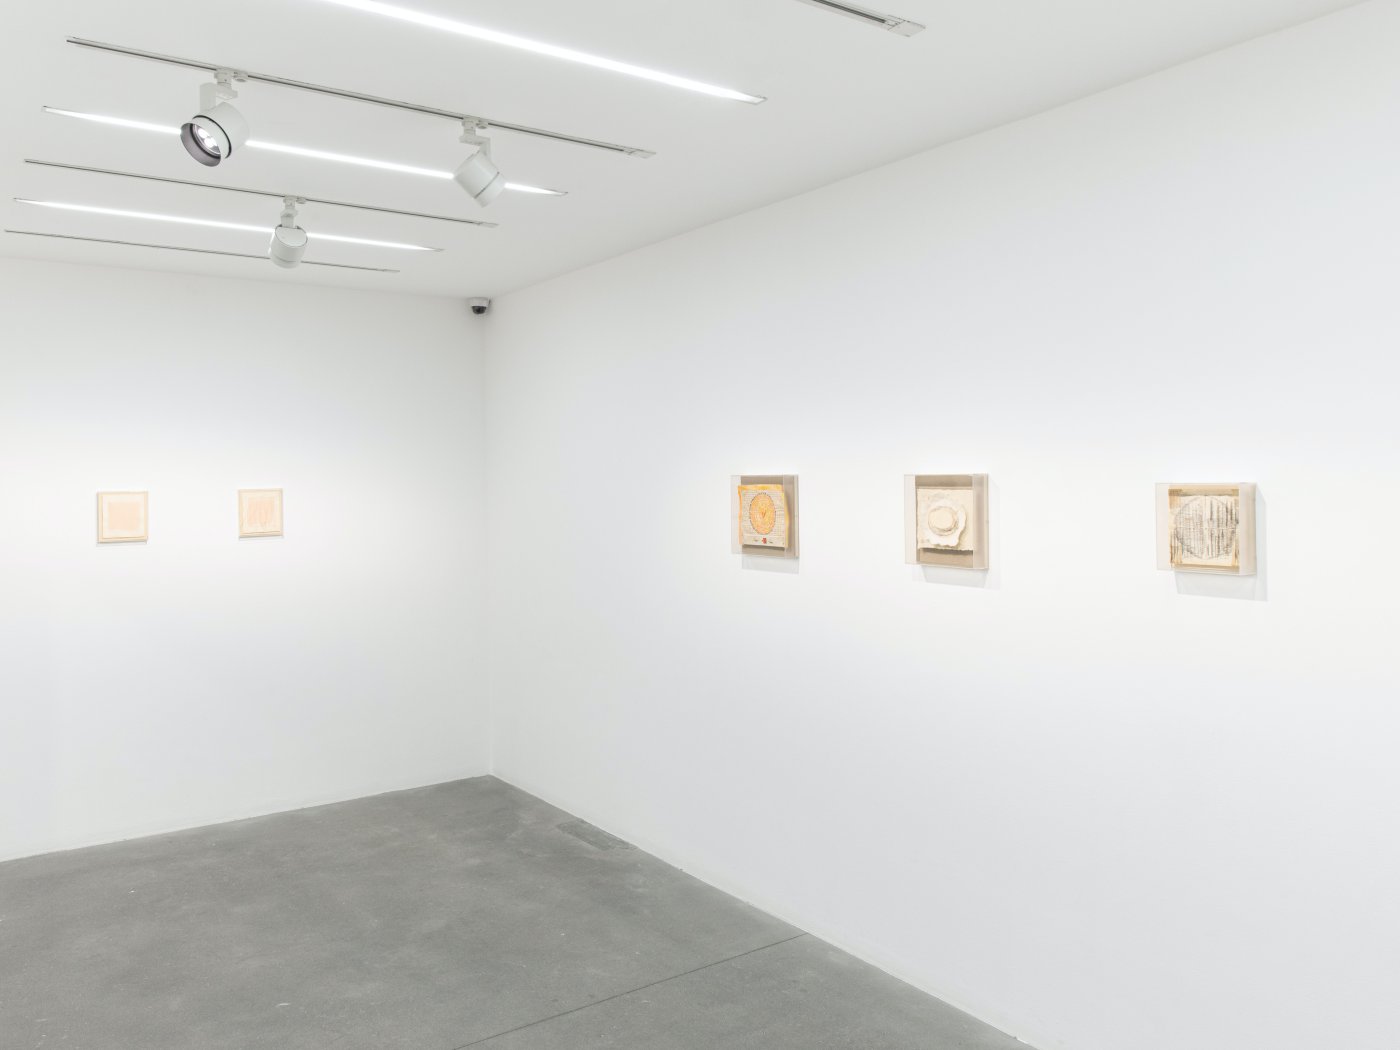 Installation image for Lenore Tawney: Part One, at Alison Jacques